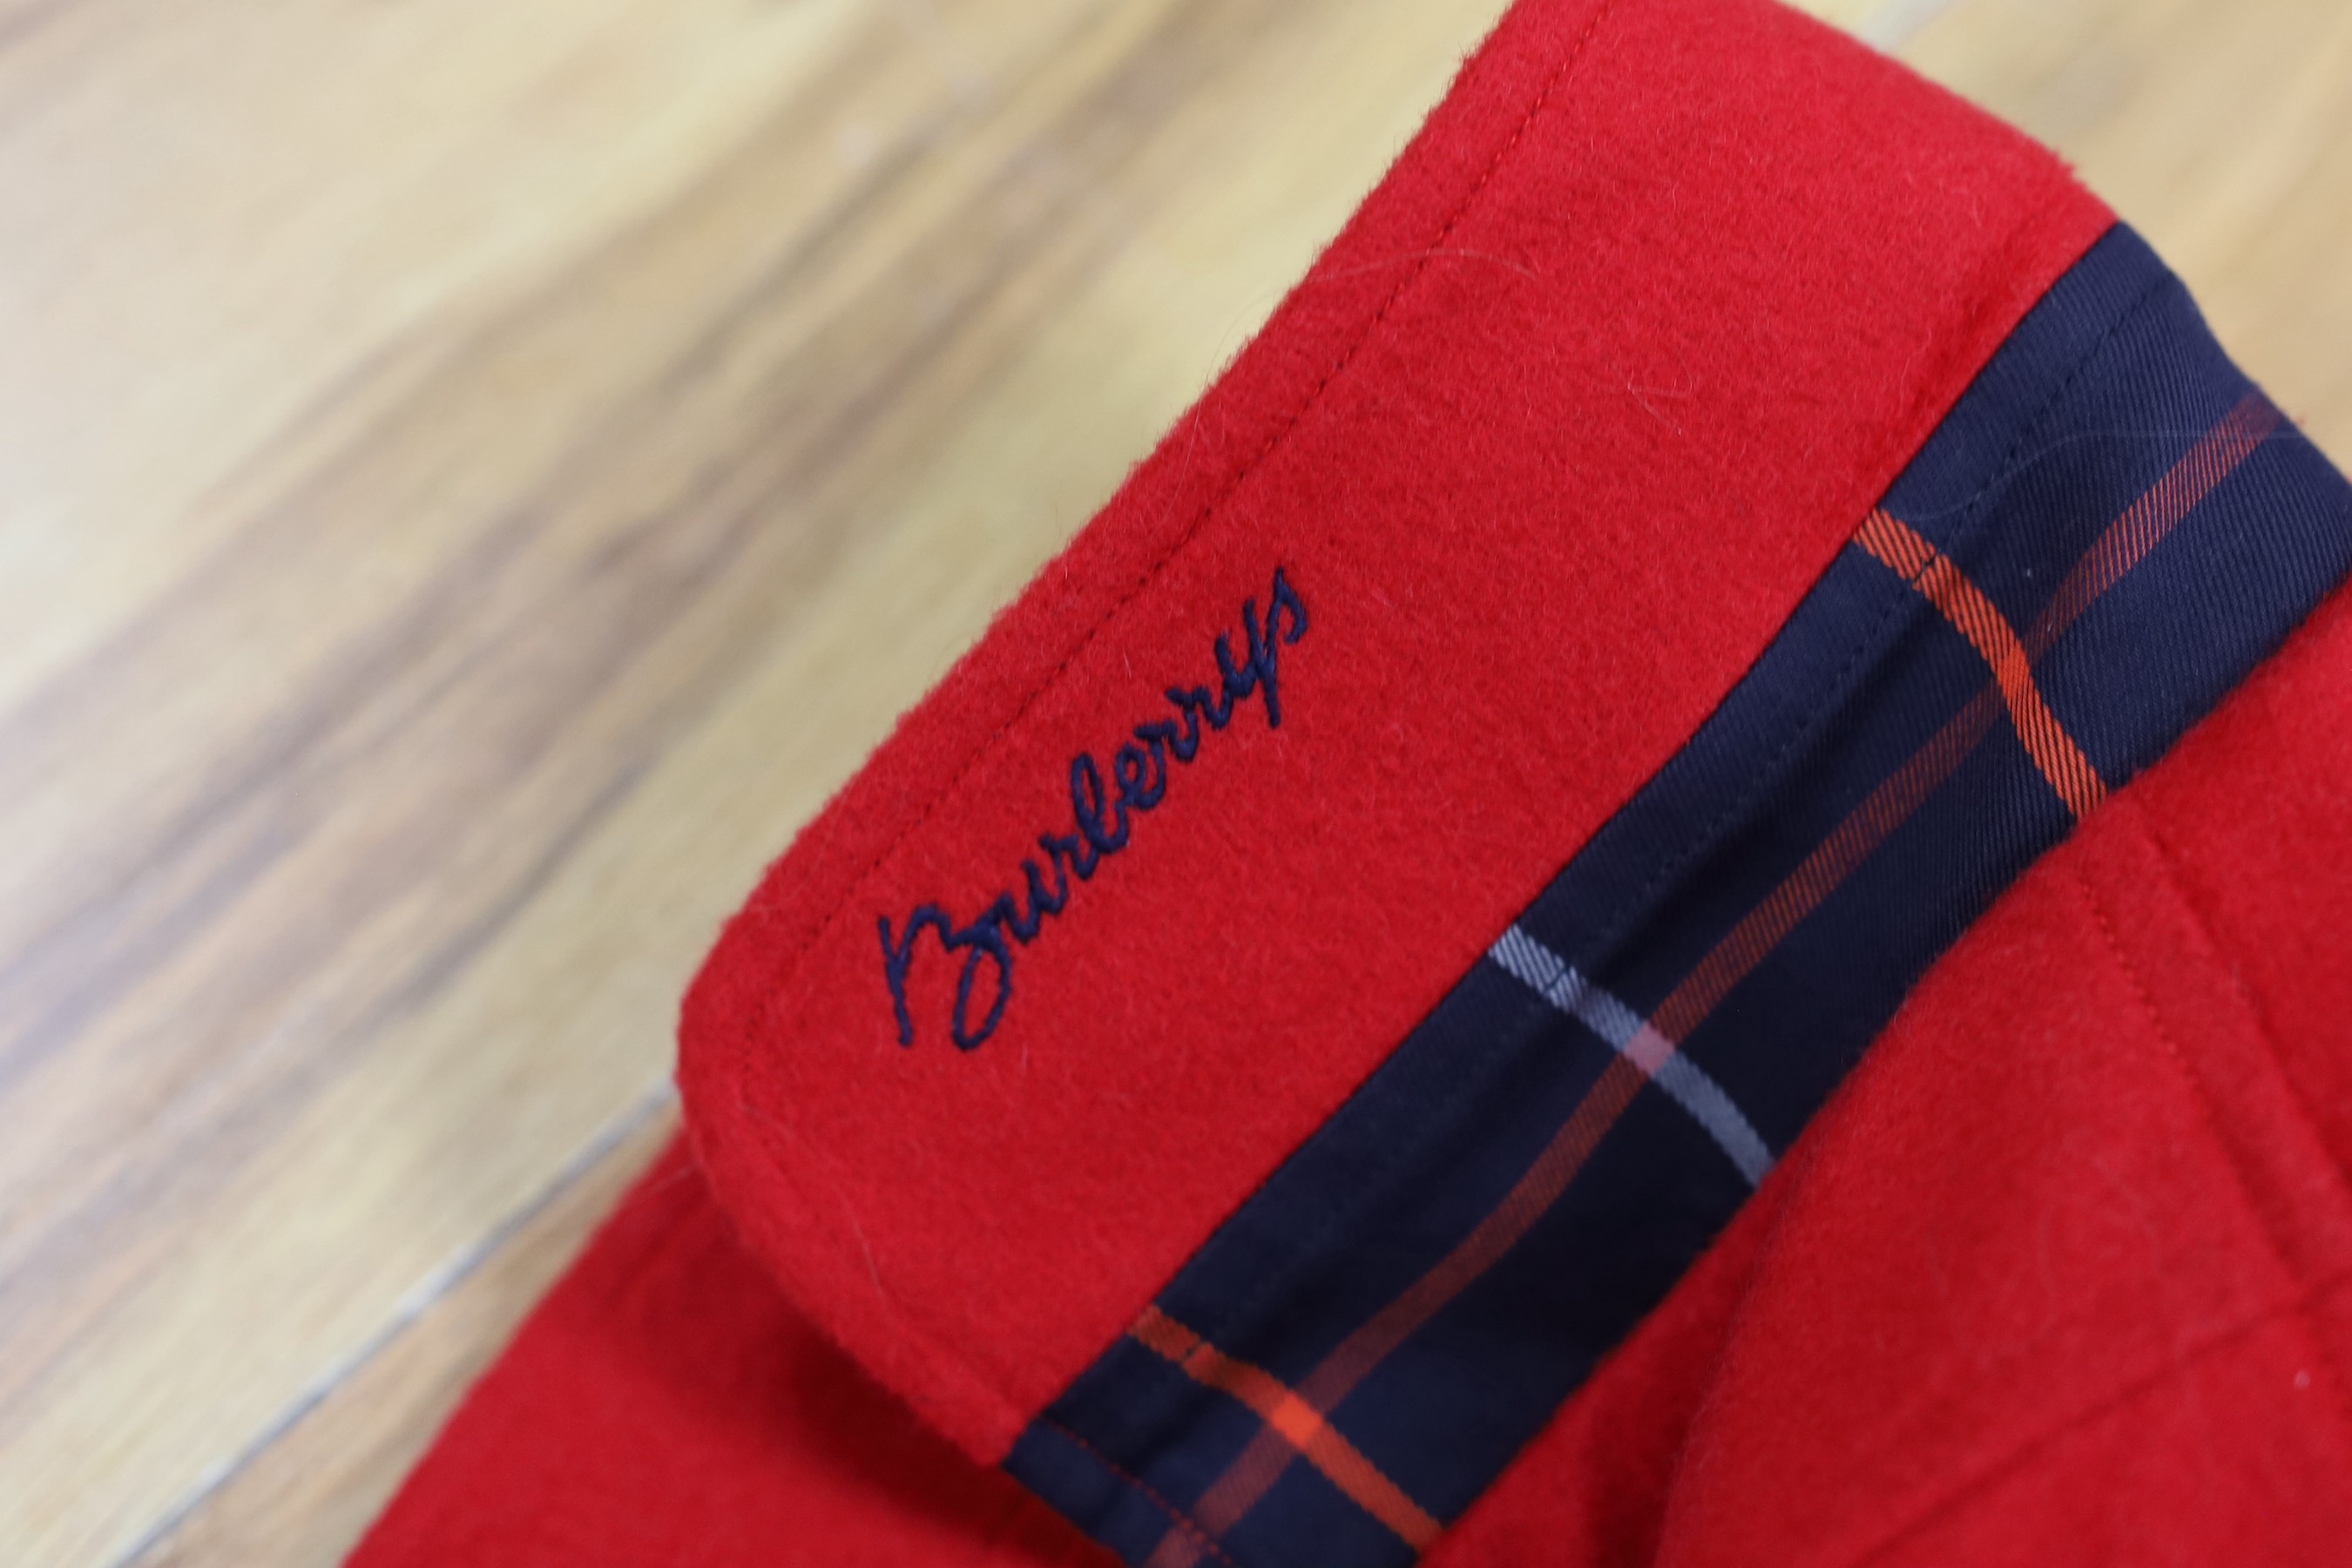 Two vintage Burberry items of clothing: a pleated skirt and a red Harrington jacket